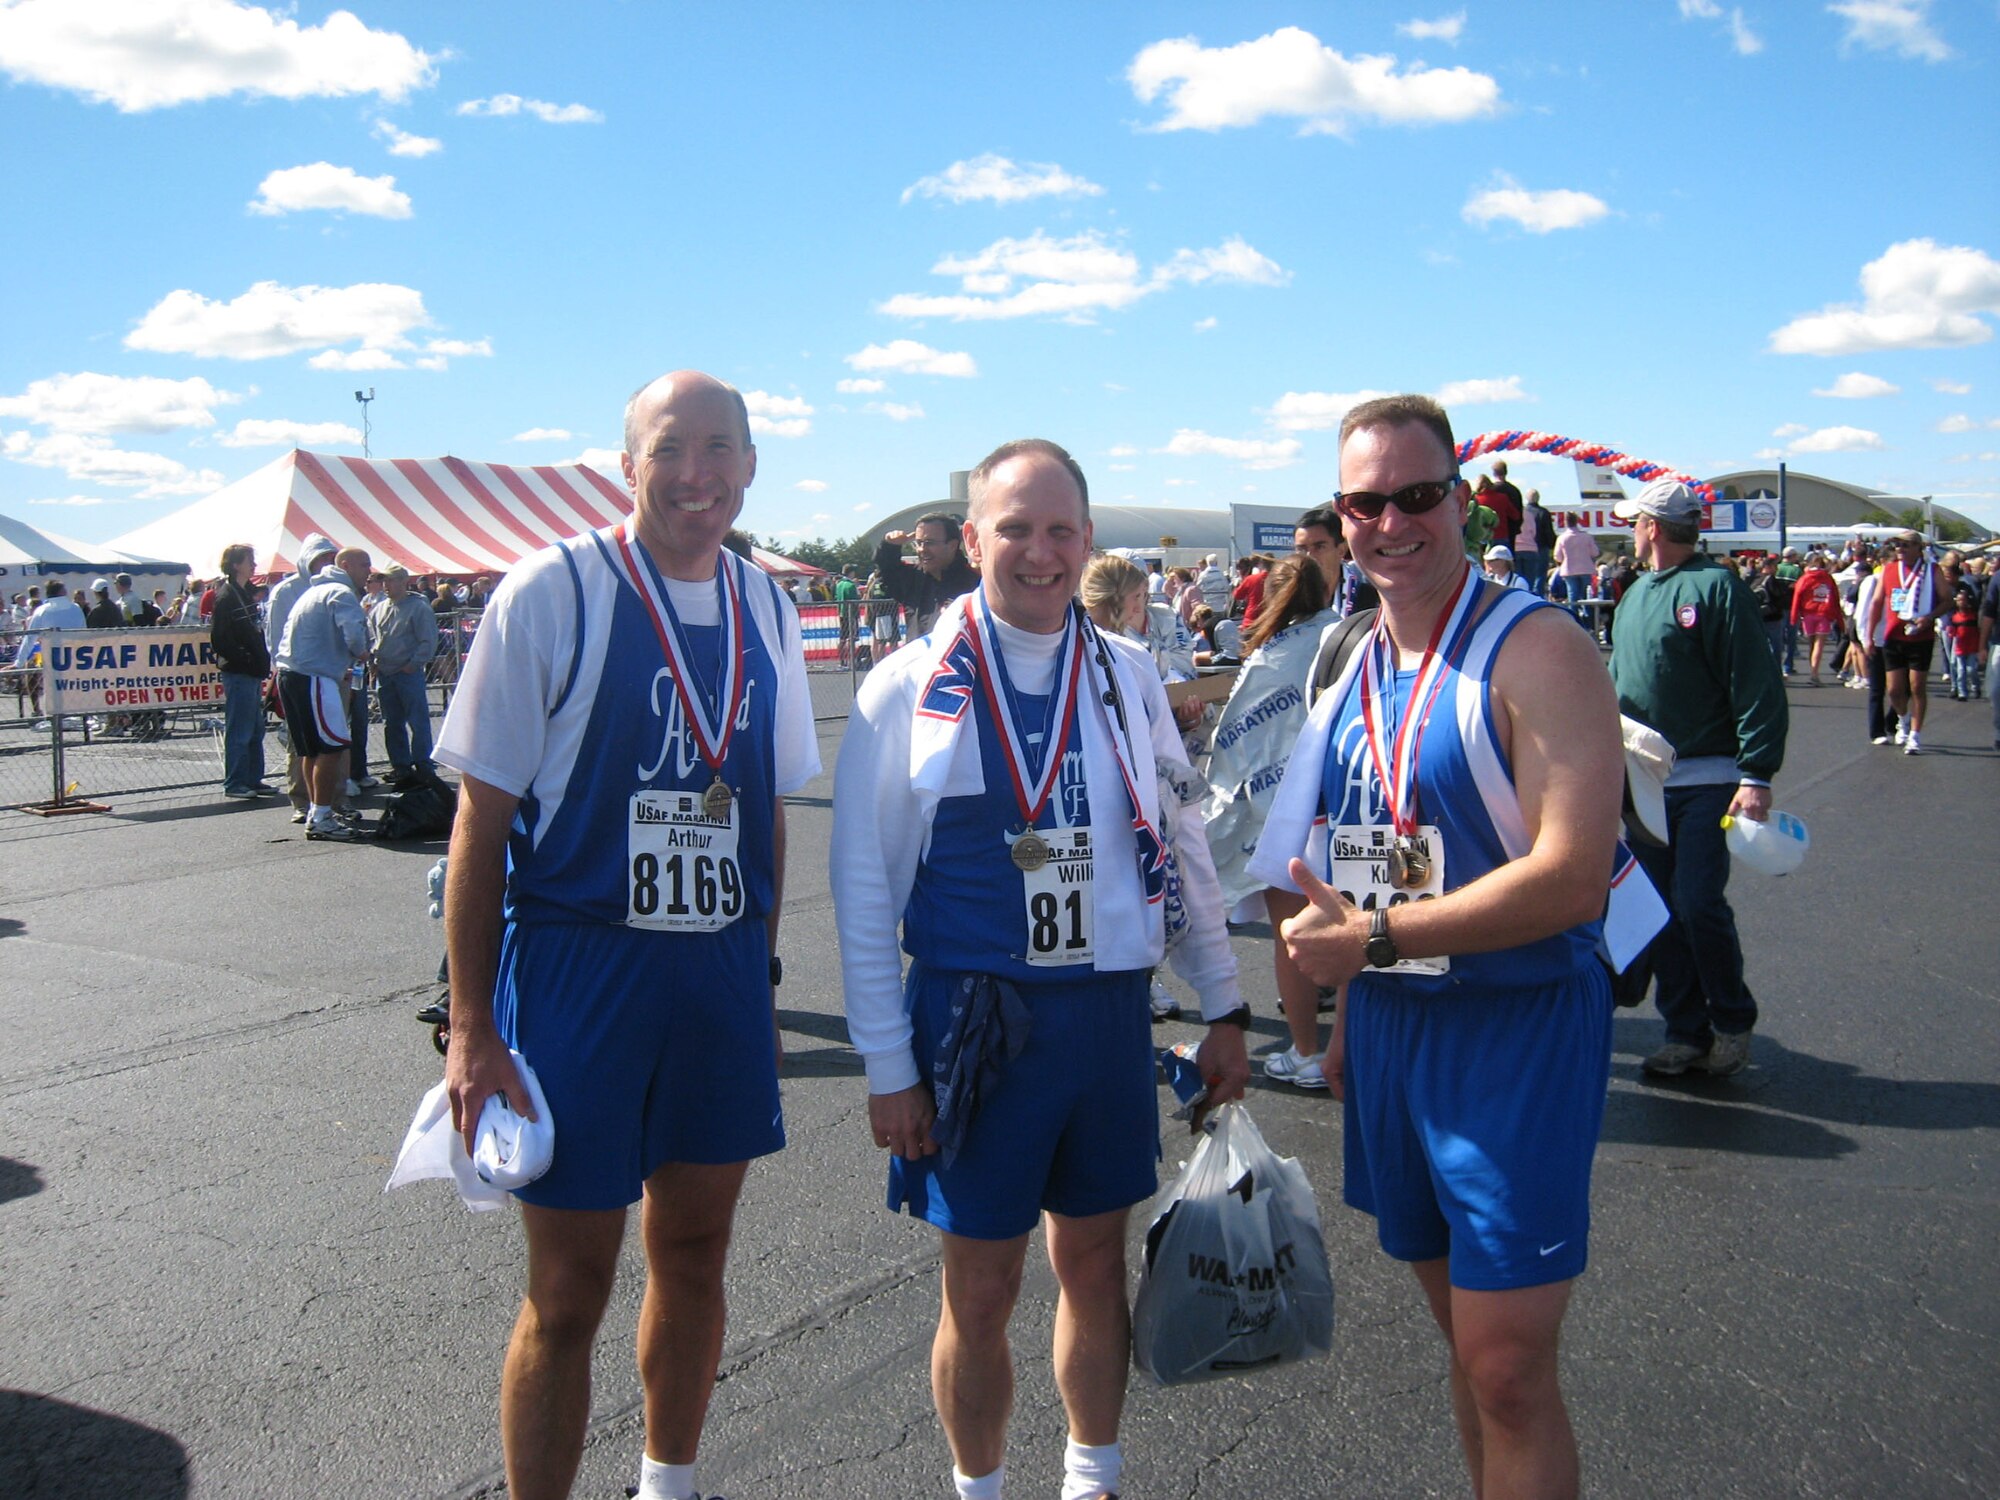 From left to right, AEDC Commander Col. Art Huber, 716th Test Squadron Commander Lt. Col. William Hack, and Maj. Kurt Rouser show off their medallions after finishing 9th out of 40 teams in the military relay category with a time of 3:25:22. 704th Test Group Commander Col. James Jolliffe is not pictured.